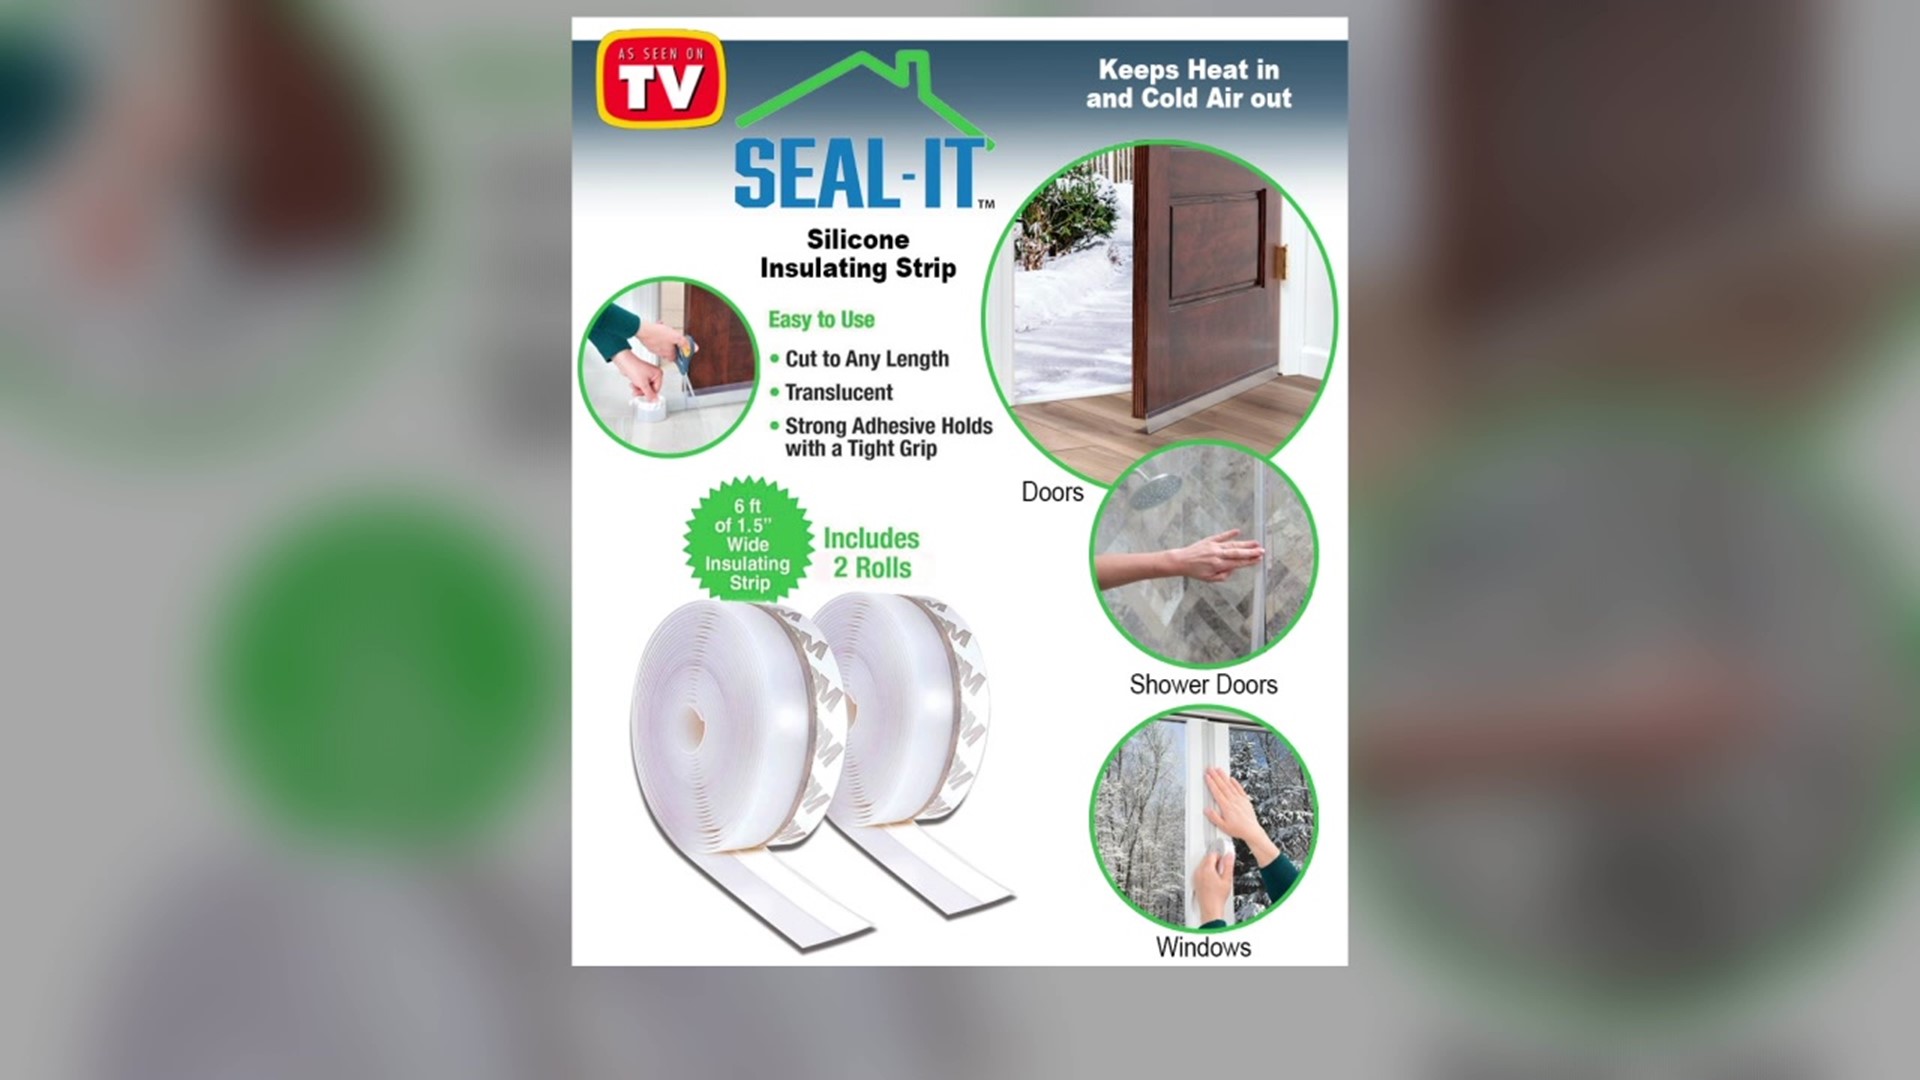 The maker claims it will create an airtight seal around your drafty doors and windows.